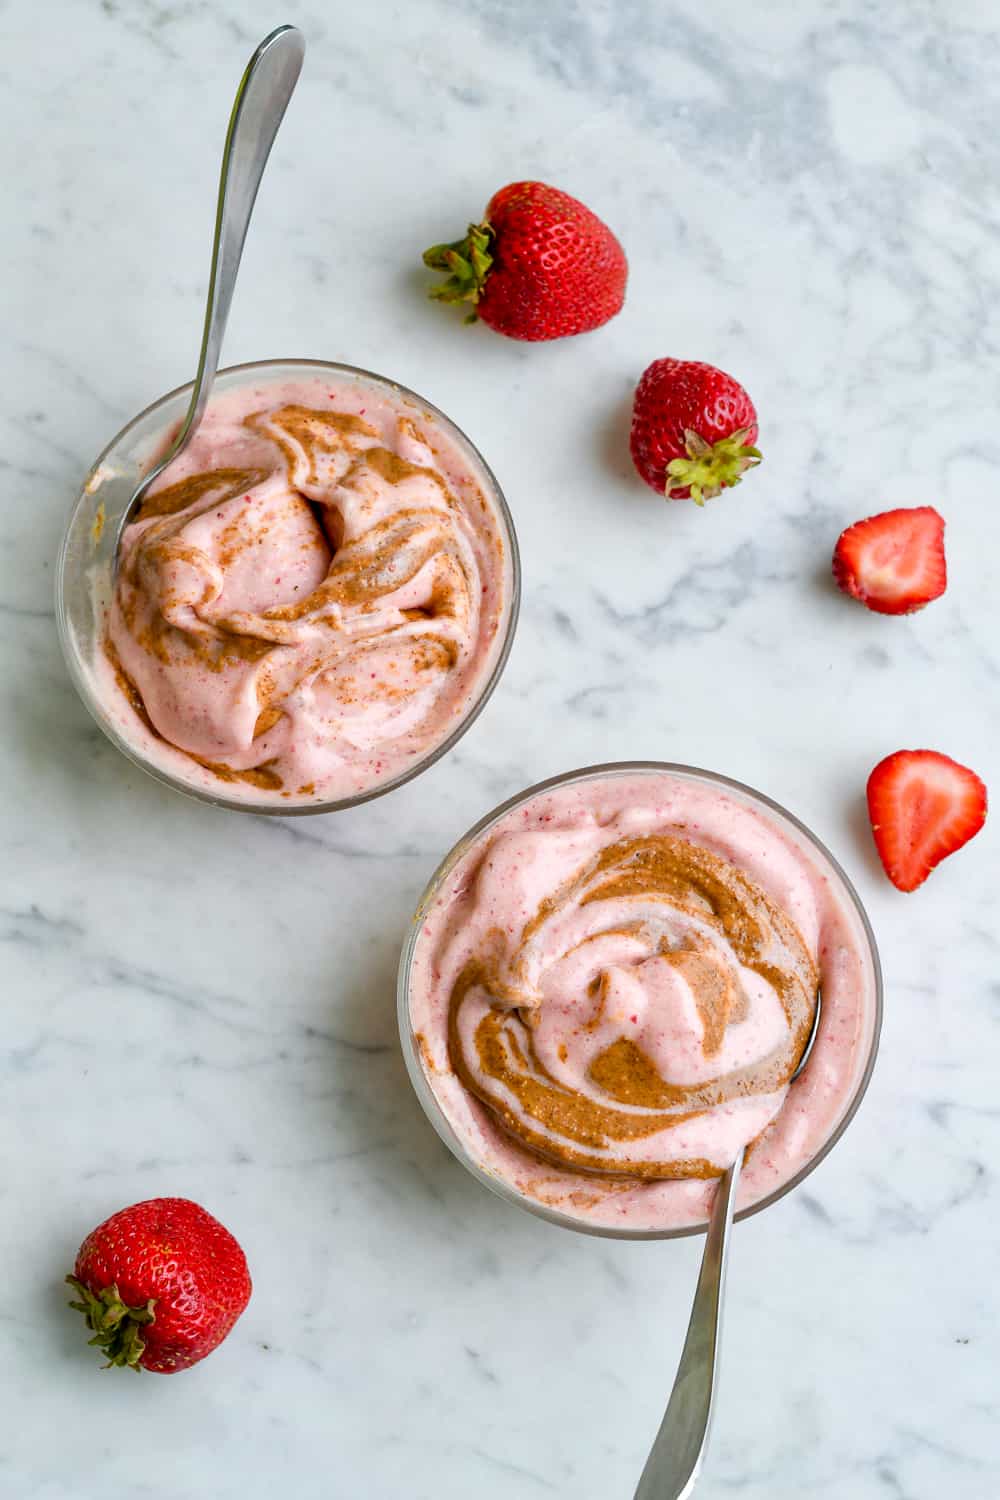 Vegan Strawberry Almond Butter Ice Cream 2 bowls and strawberries